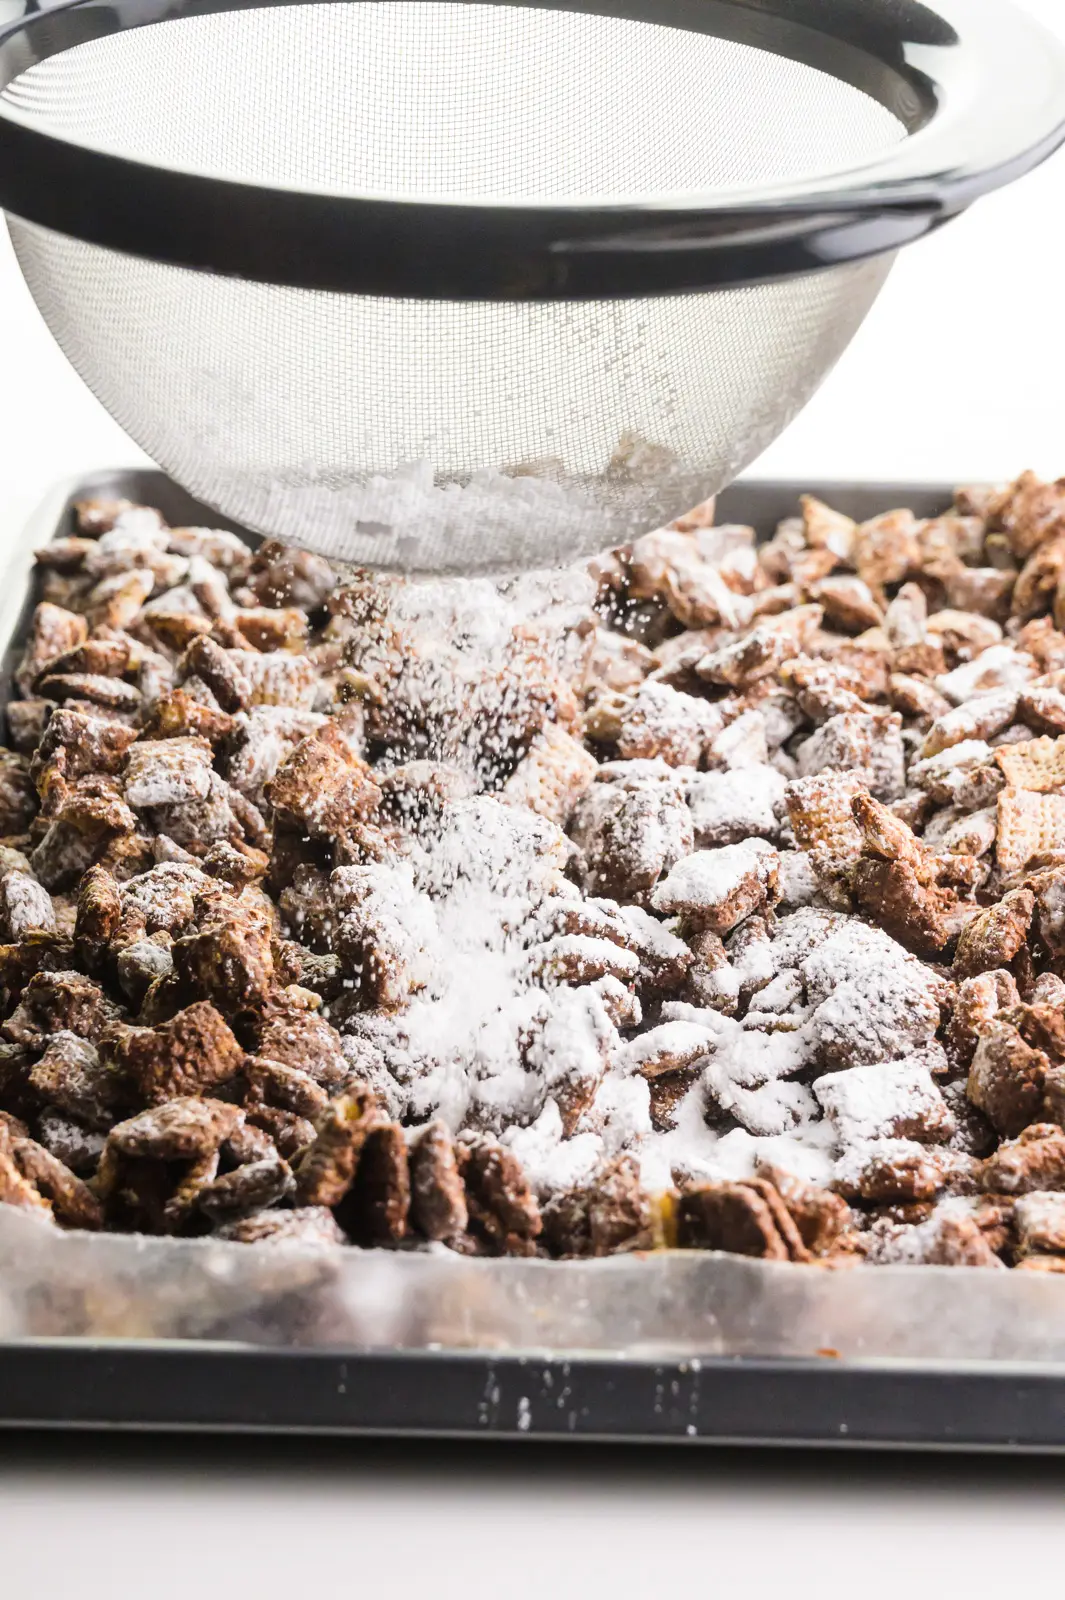 Powdered sugar is being sifted over a pan full of chocolate coated cereal pieces.